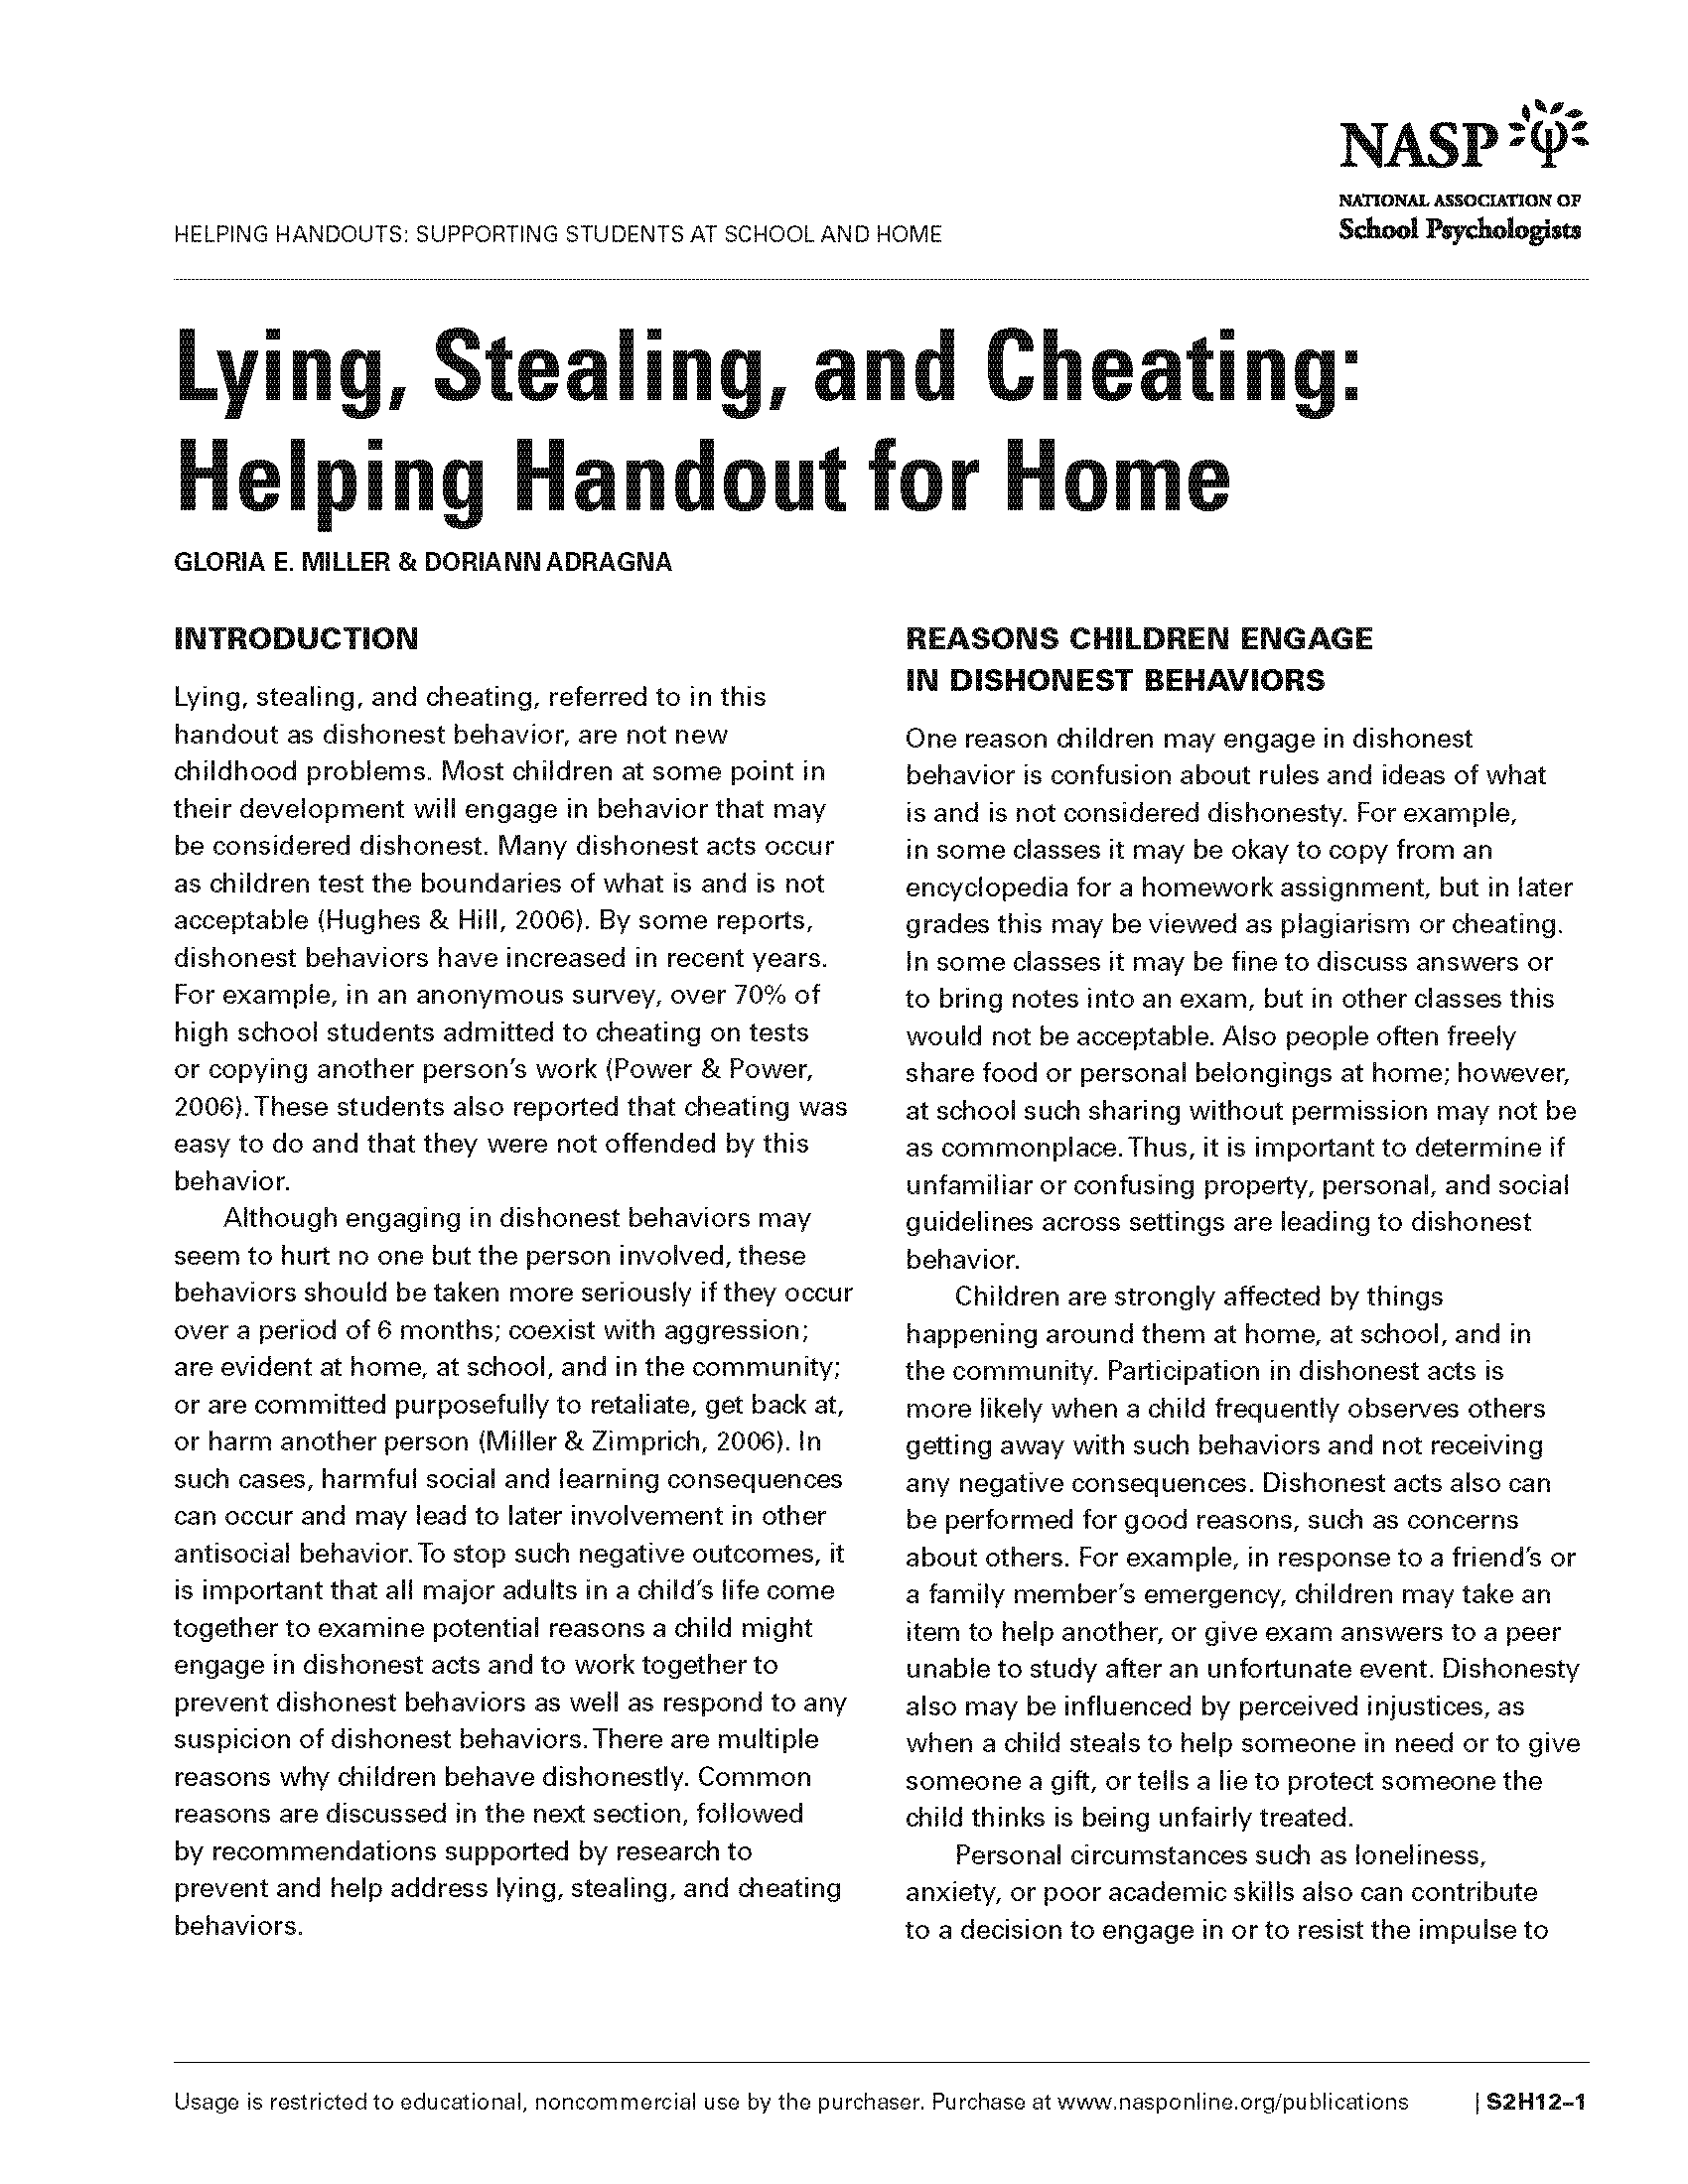 Lying, Stealing, and Cheating: Helping Handout for Home